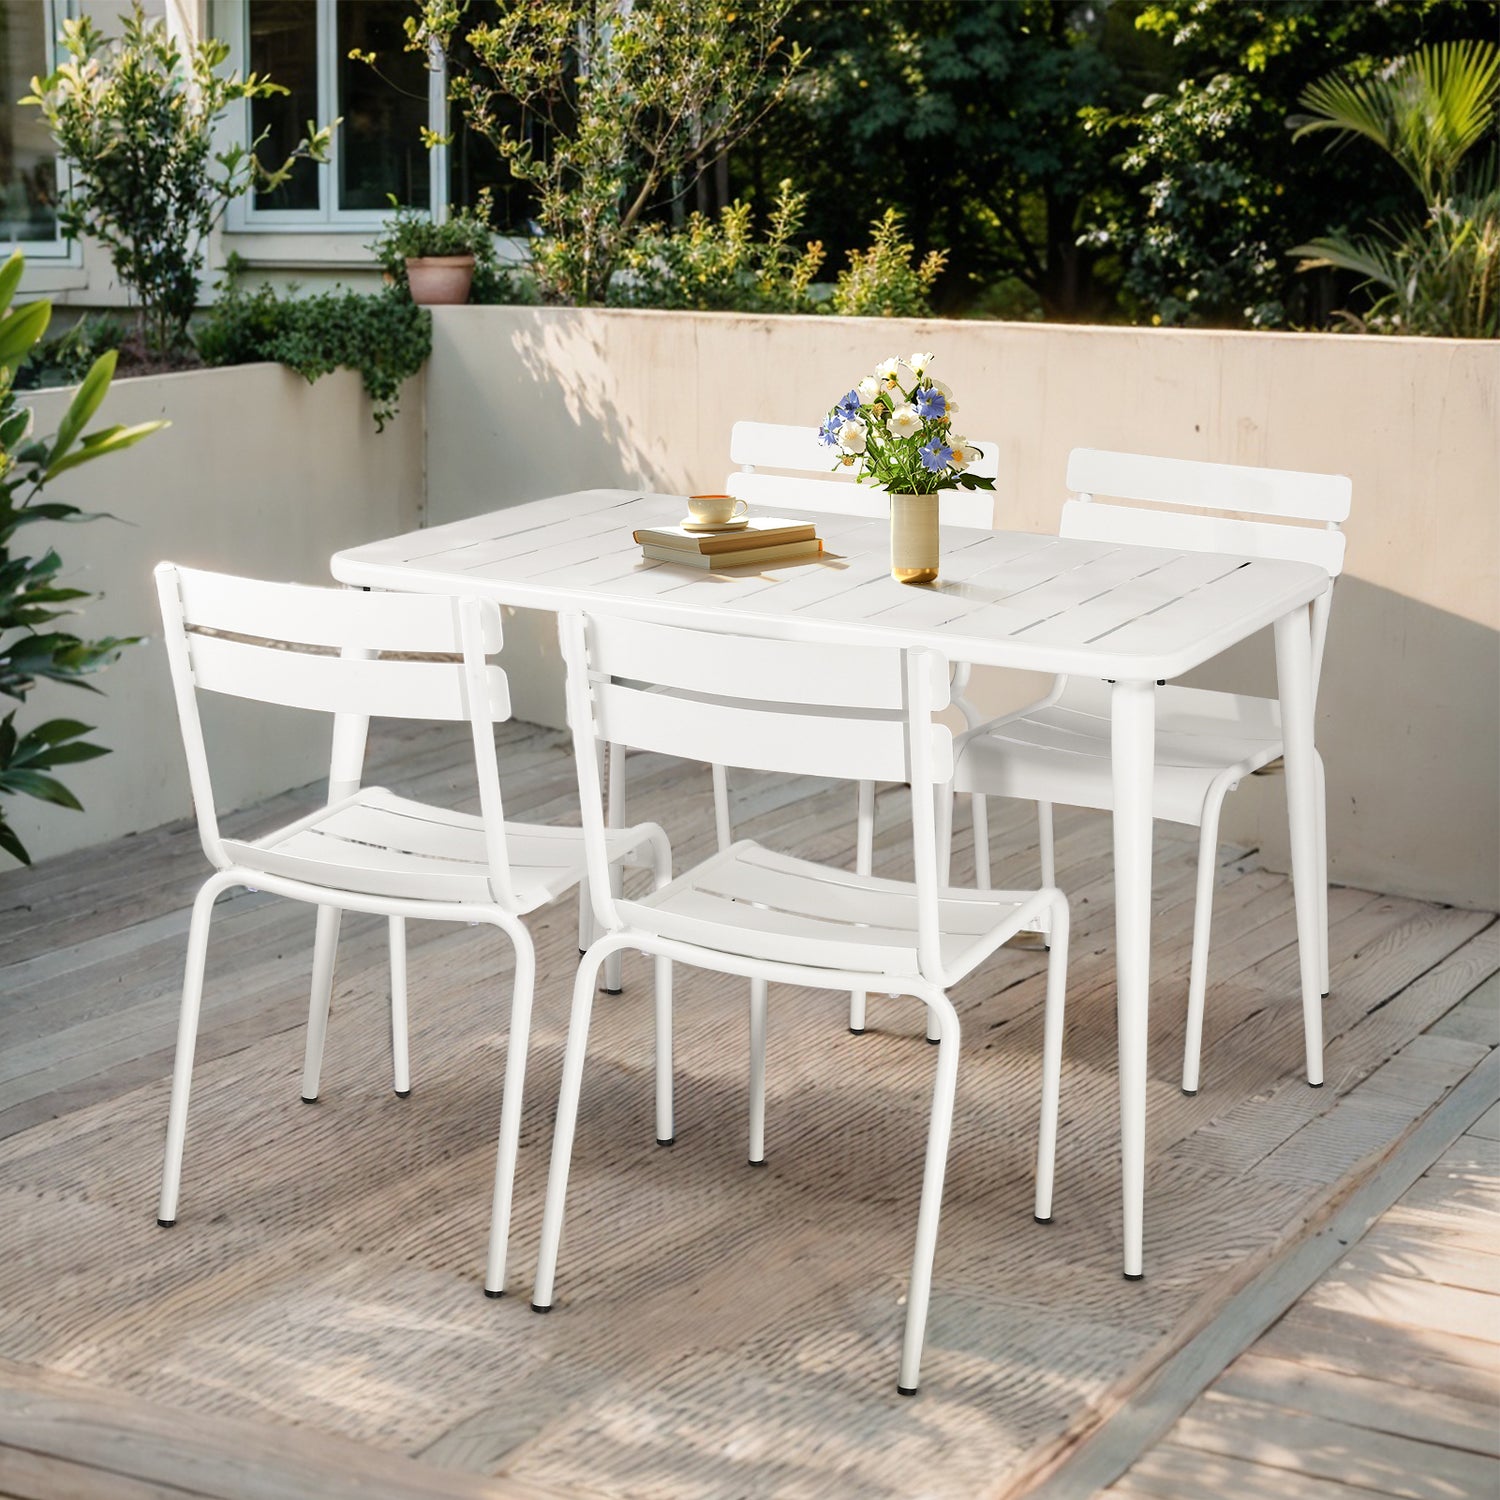 OUTDOOR TABLE AND CHAIR